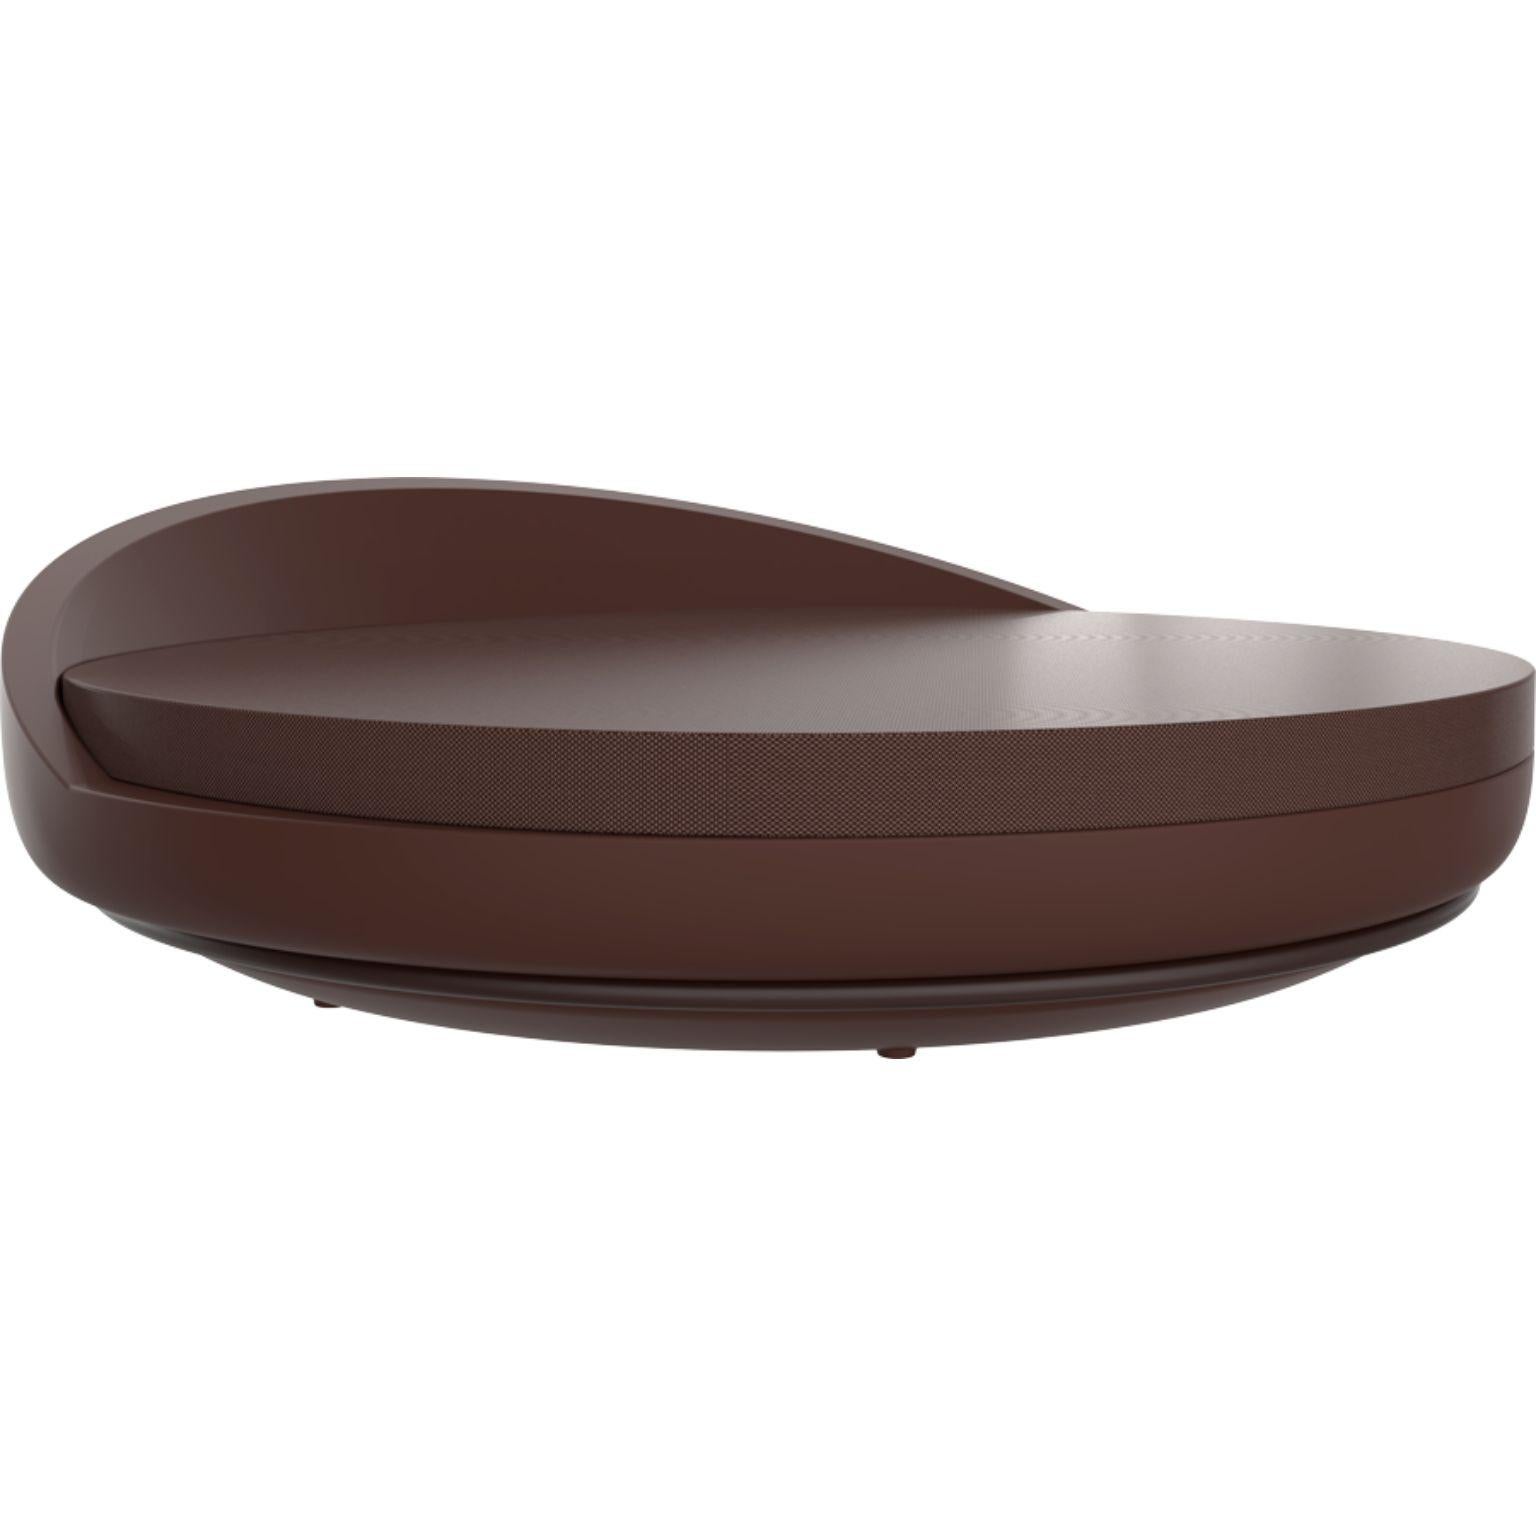 Lace chocolate daybed by MOWEE
Dimensions: D200 x W195 x H60 cm.
Material: Polyethylene, stainless steel and polyester.
Weight: 60 kg
Also available in different colors and finishes (lacquered). Optional wheel kit. 

Lace is a collection of